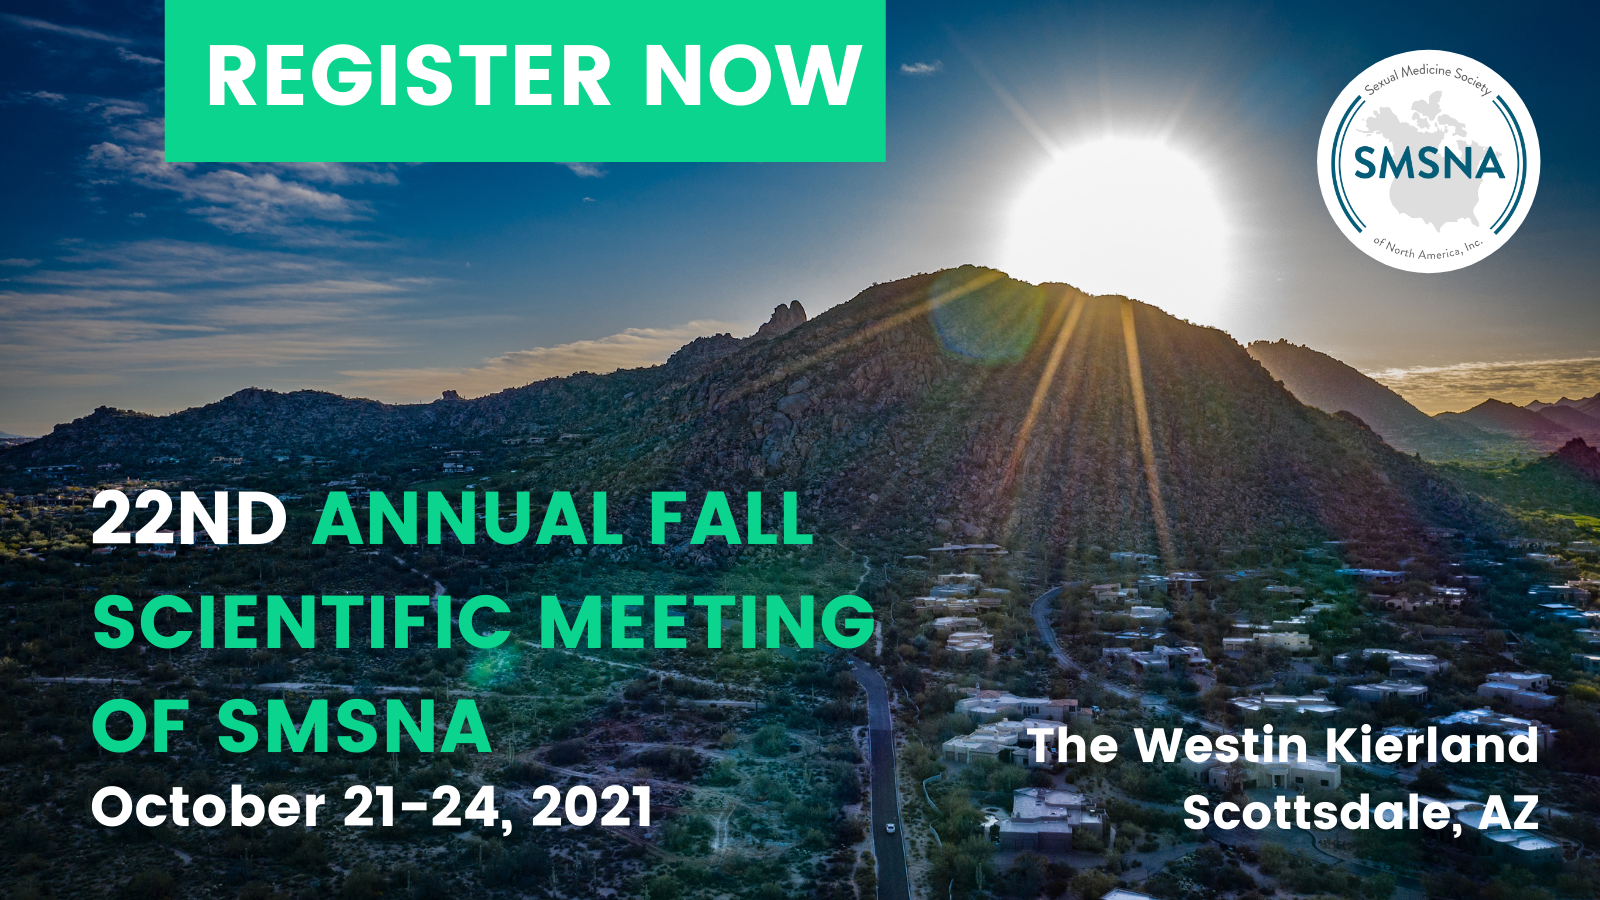 Additional Information on SMSNA Fall Scientific Meeting 2021